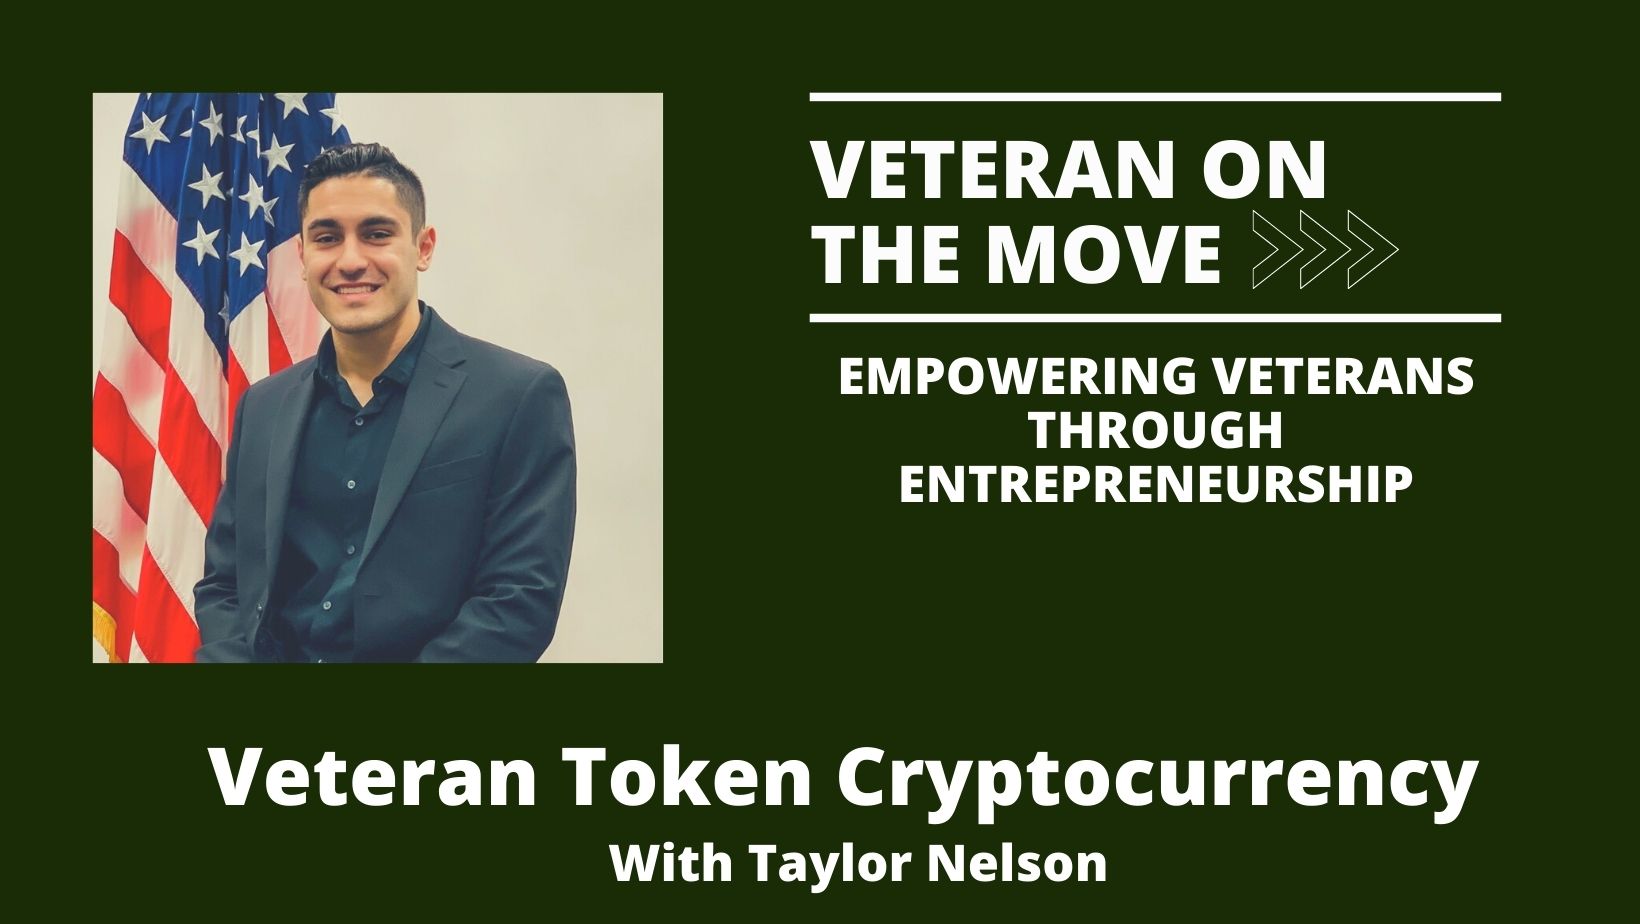 Taylor Nelson, Veteran On The Move